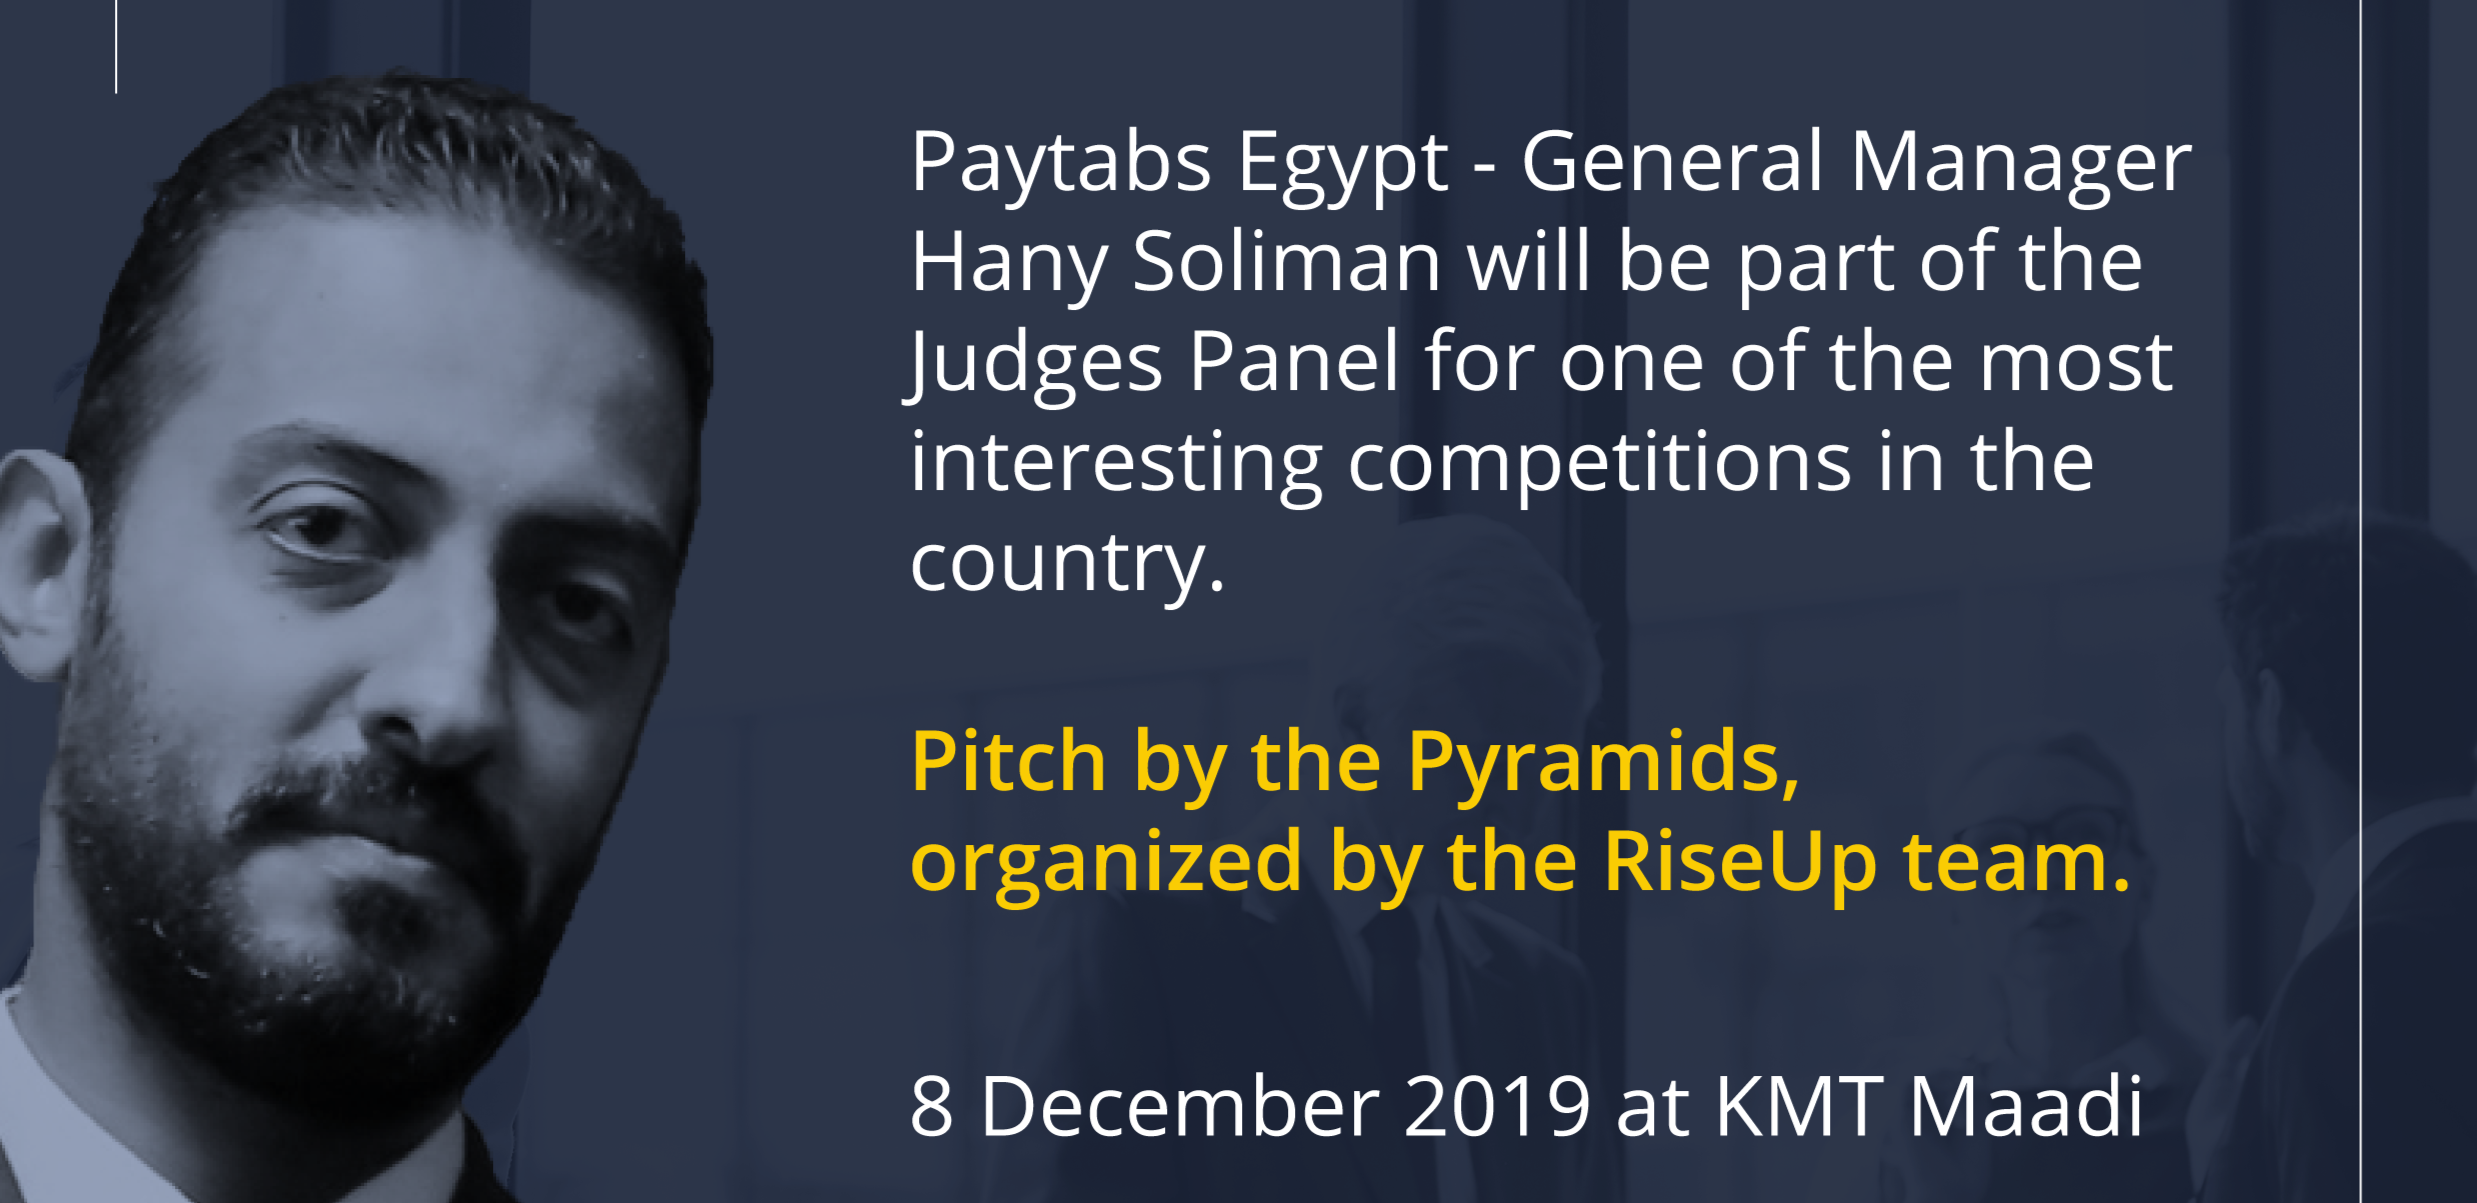 Pitch by the Pyramids